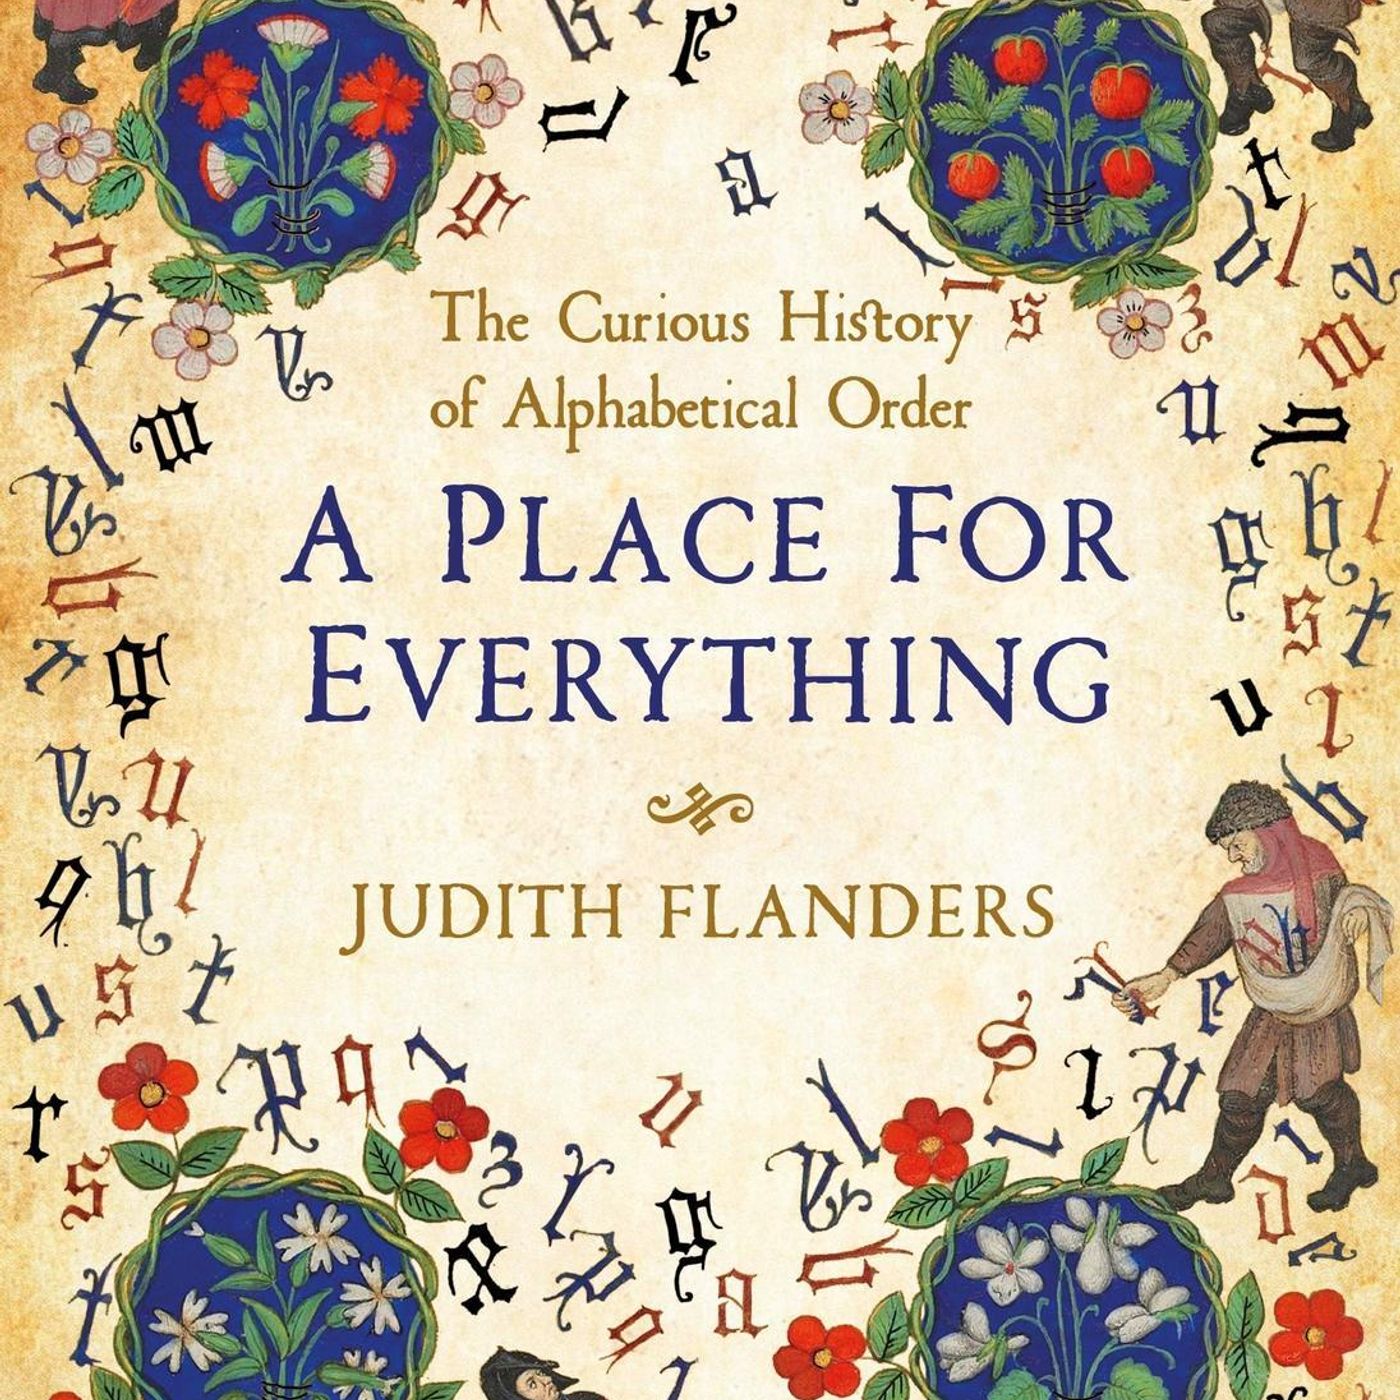 Judith Flanders: A Place For Everything